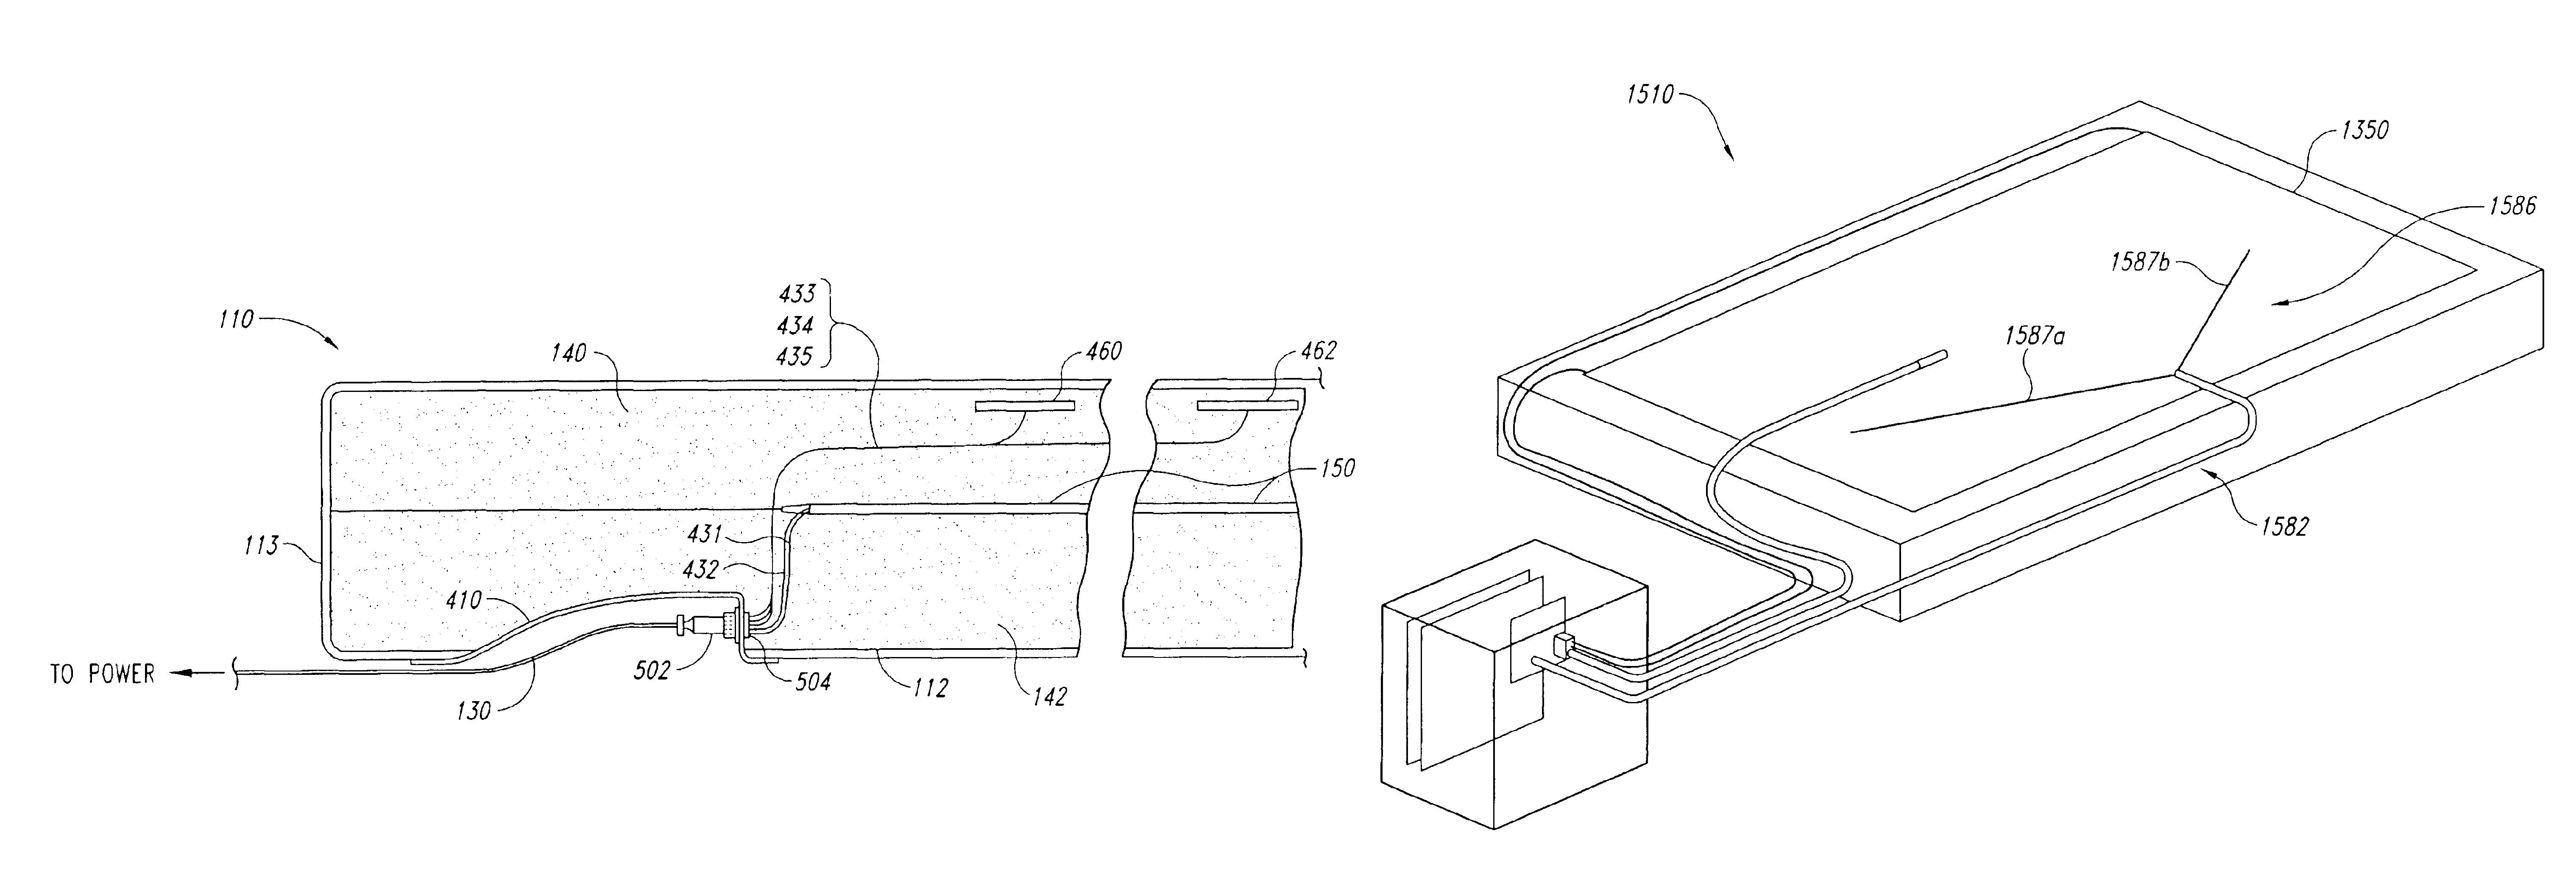 Personal warming systems and apparatuses for use in hospitals and other settings, and associated methods of manufacture and use